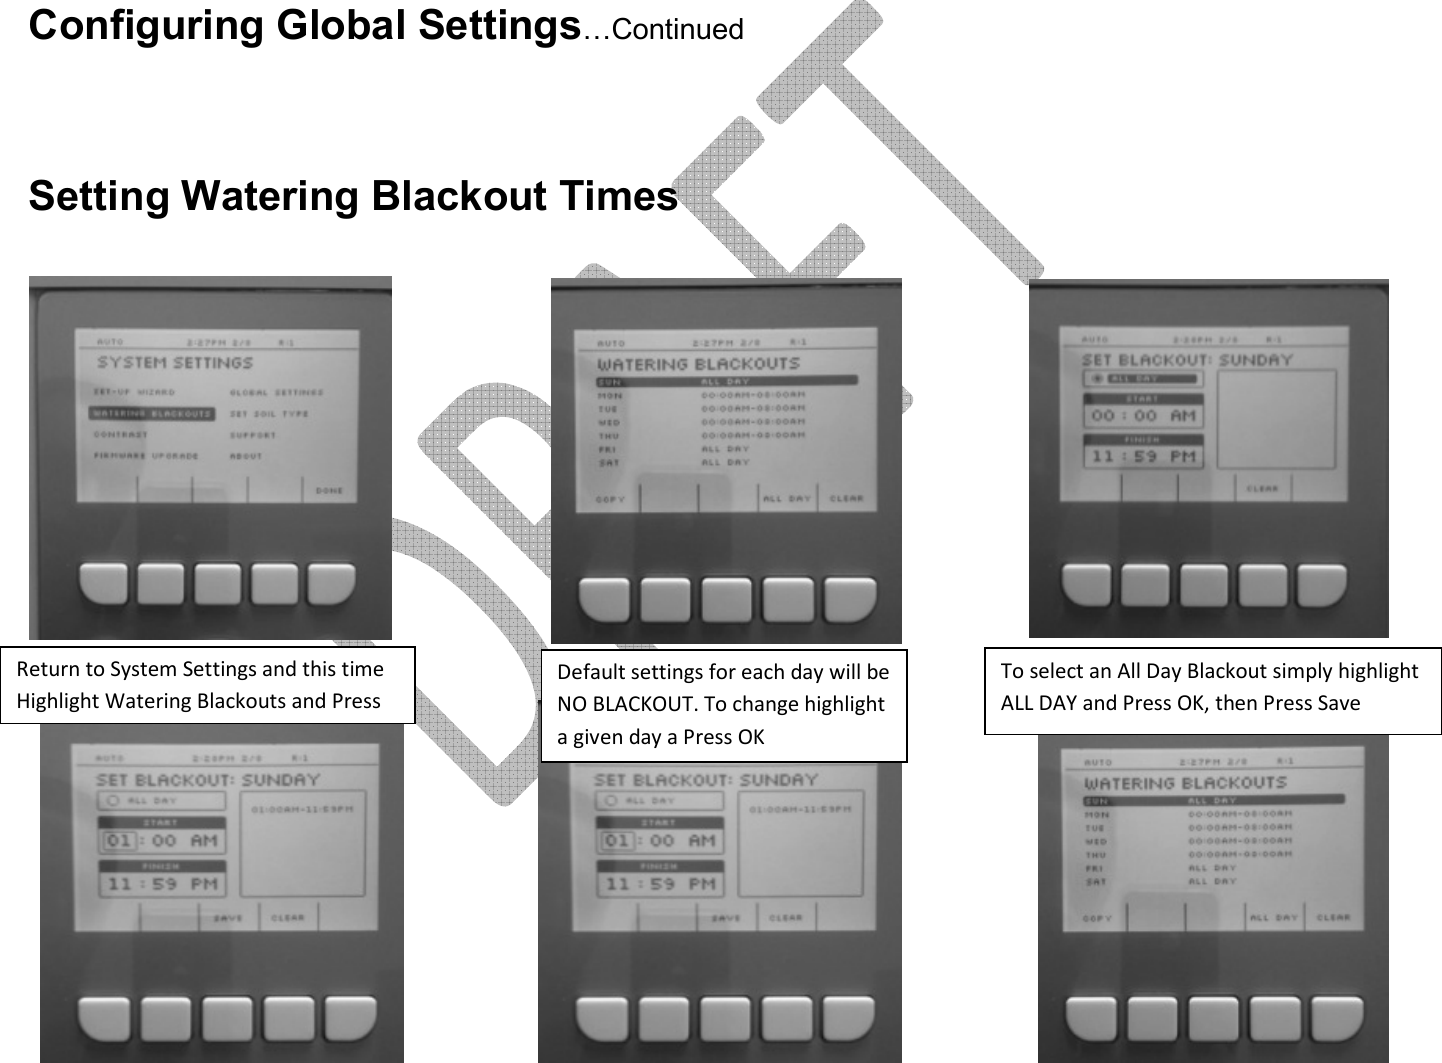       Configuring Global Settings…Continued    Setting Watering Blackout Times             Return to System Settings and this time Highlight Watering Blackouts and Press Default settings for each day will be NO BLACKOUT. To change highlight a given day a Press OK  To select an All Day Blackout simply highlight ALL DAY and Press OK, then Press Save 